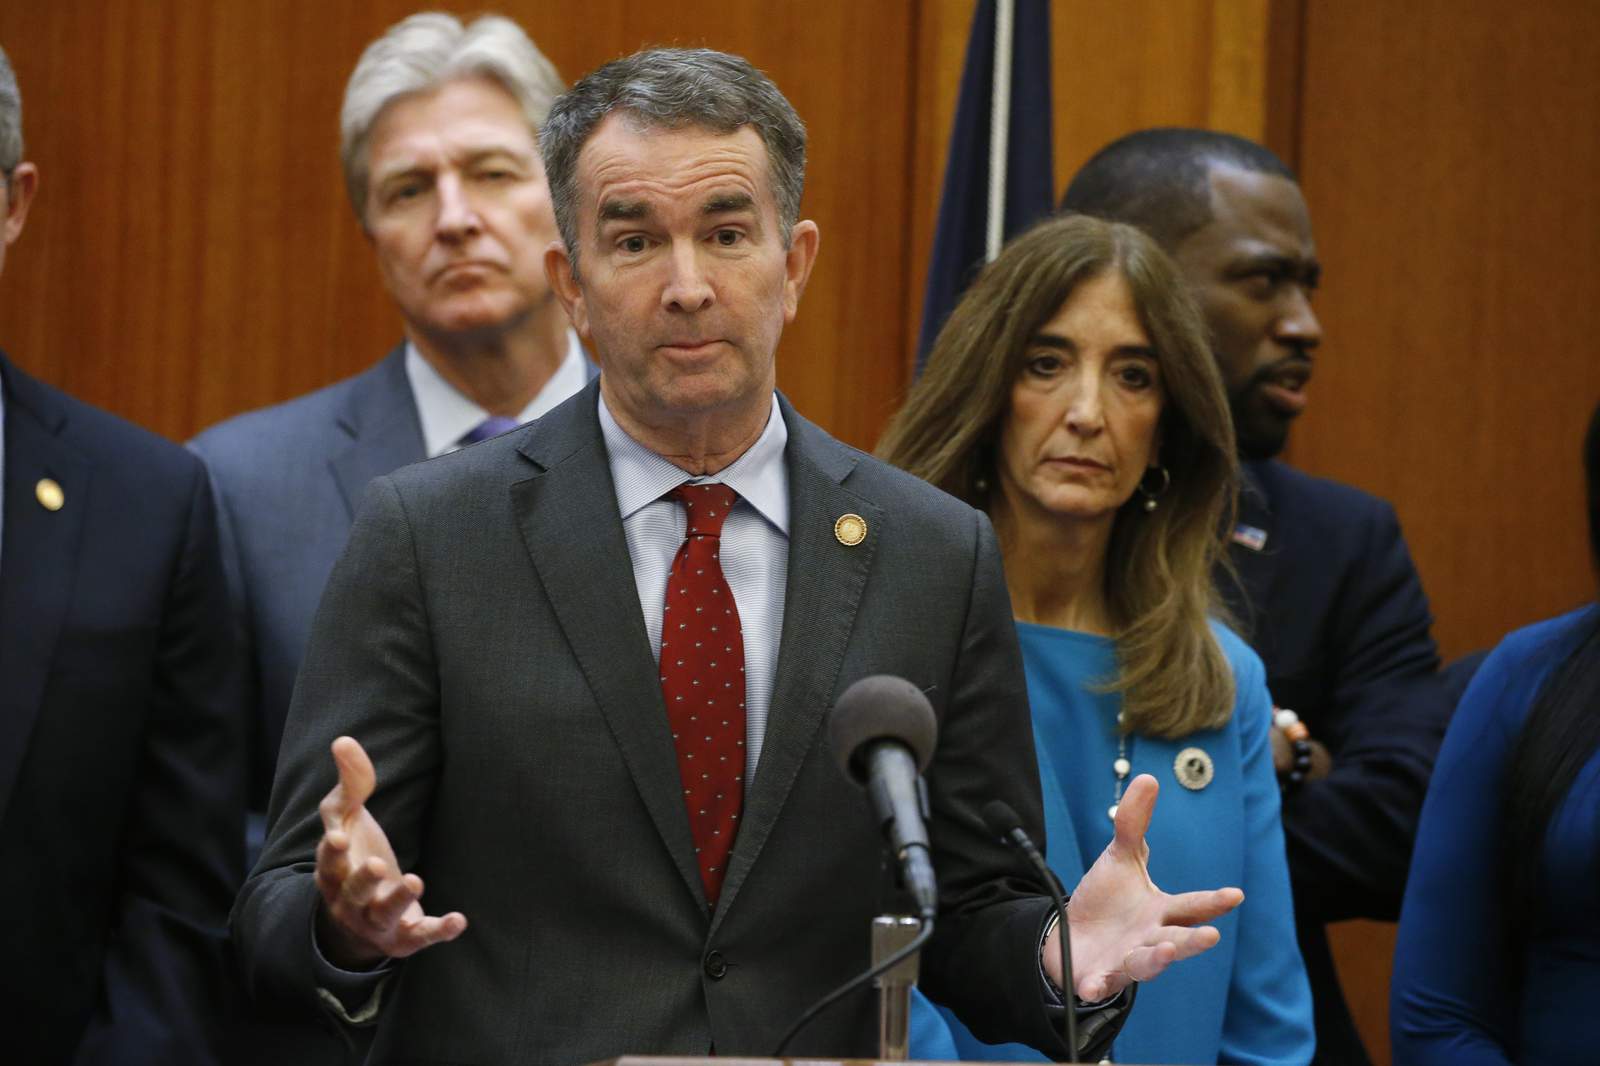 Gov. Northam proposes measures to expand voting access